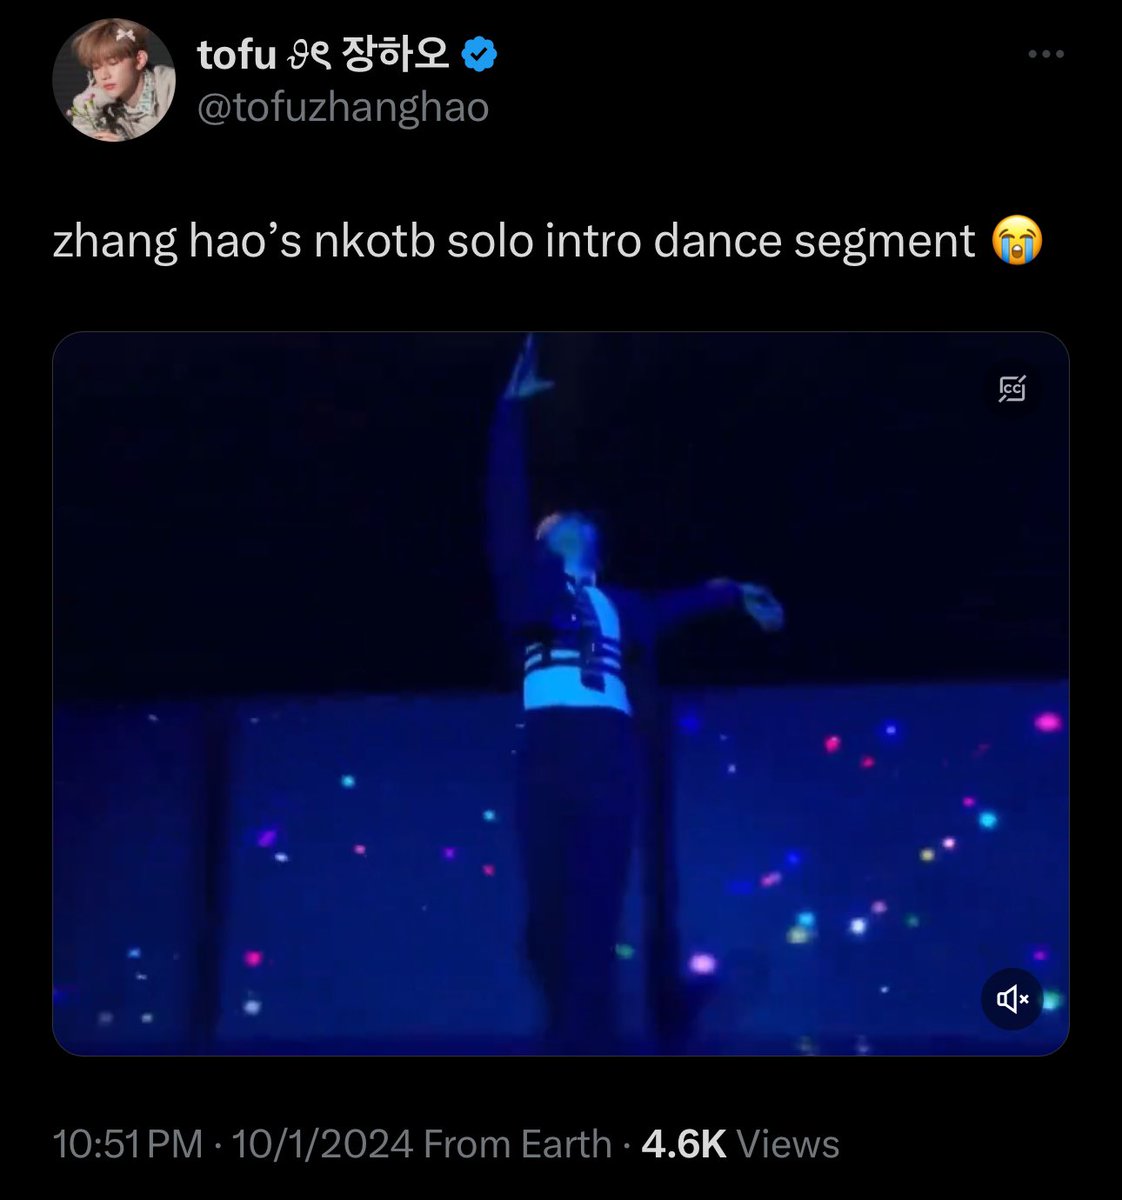 ik this topic have been discussed quite a few times already but it still baffles me how wakeone deliberately skipped to post CCMA behind where zh received his solo award and performed his solo dance break. like you can’t convince me that fuckass company doesn’t hate zh fr!